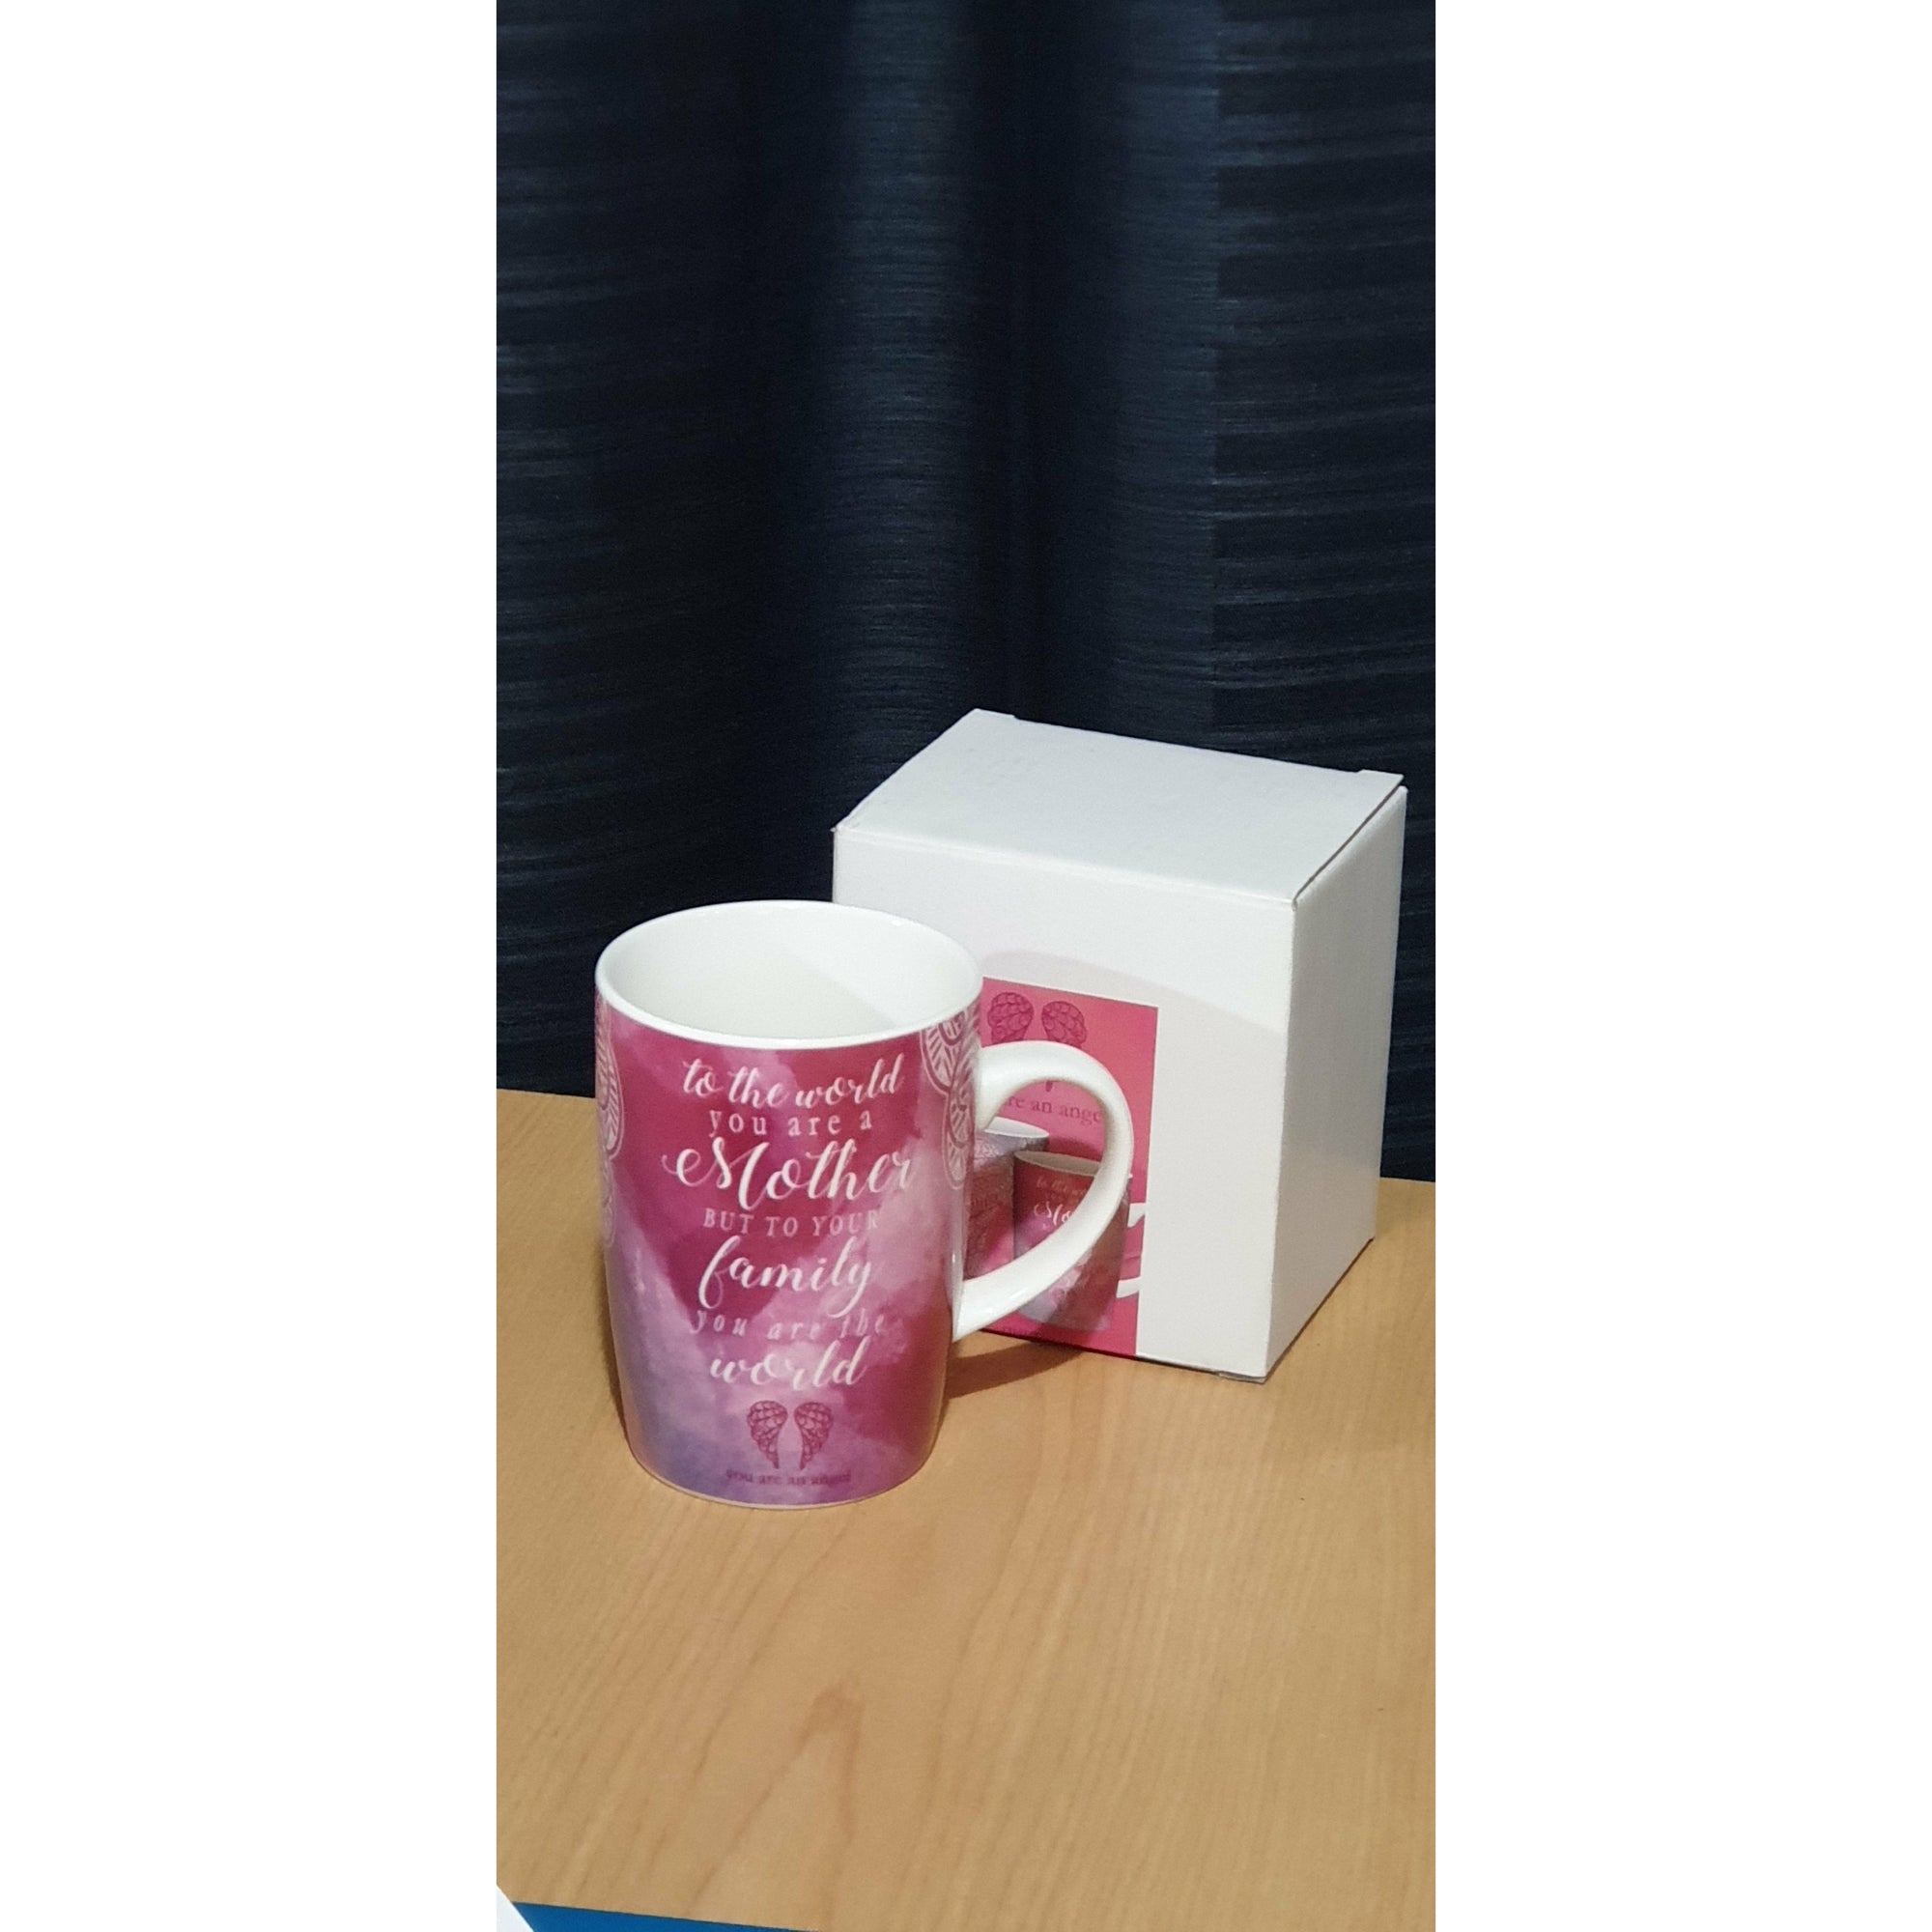 Mother - To the world Mug Not specified